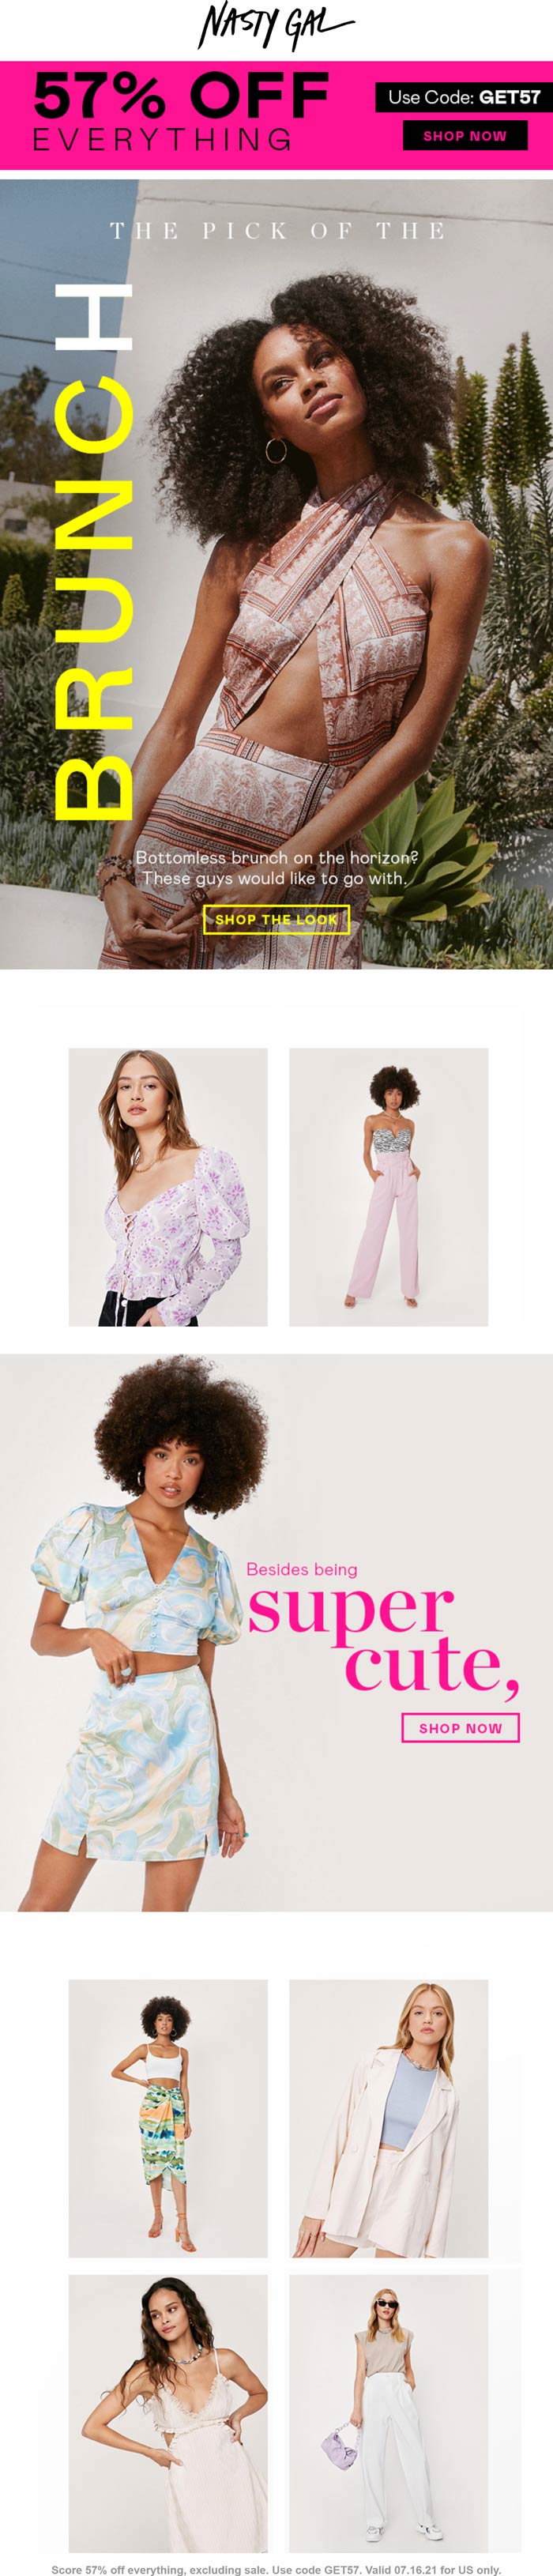 Nasty Gal stores Coupon  57% off everything today at Nasty Gal via promo code GET57 #nastygal 